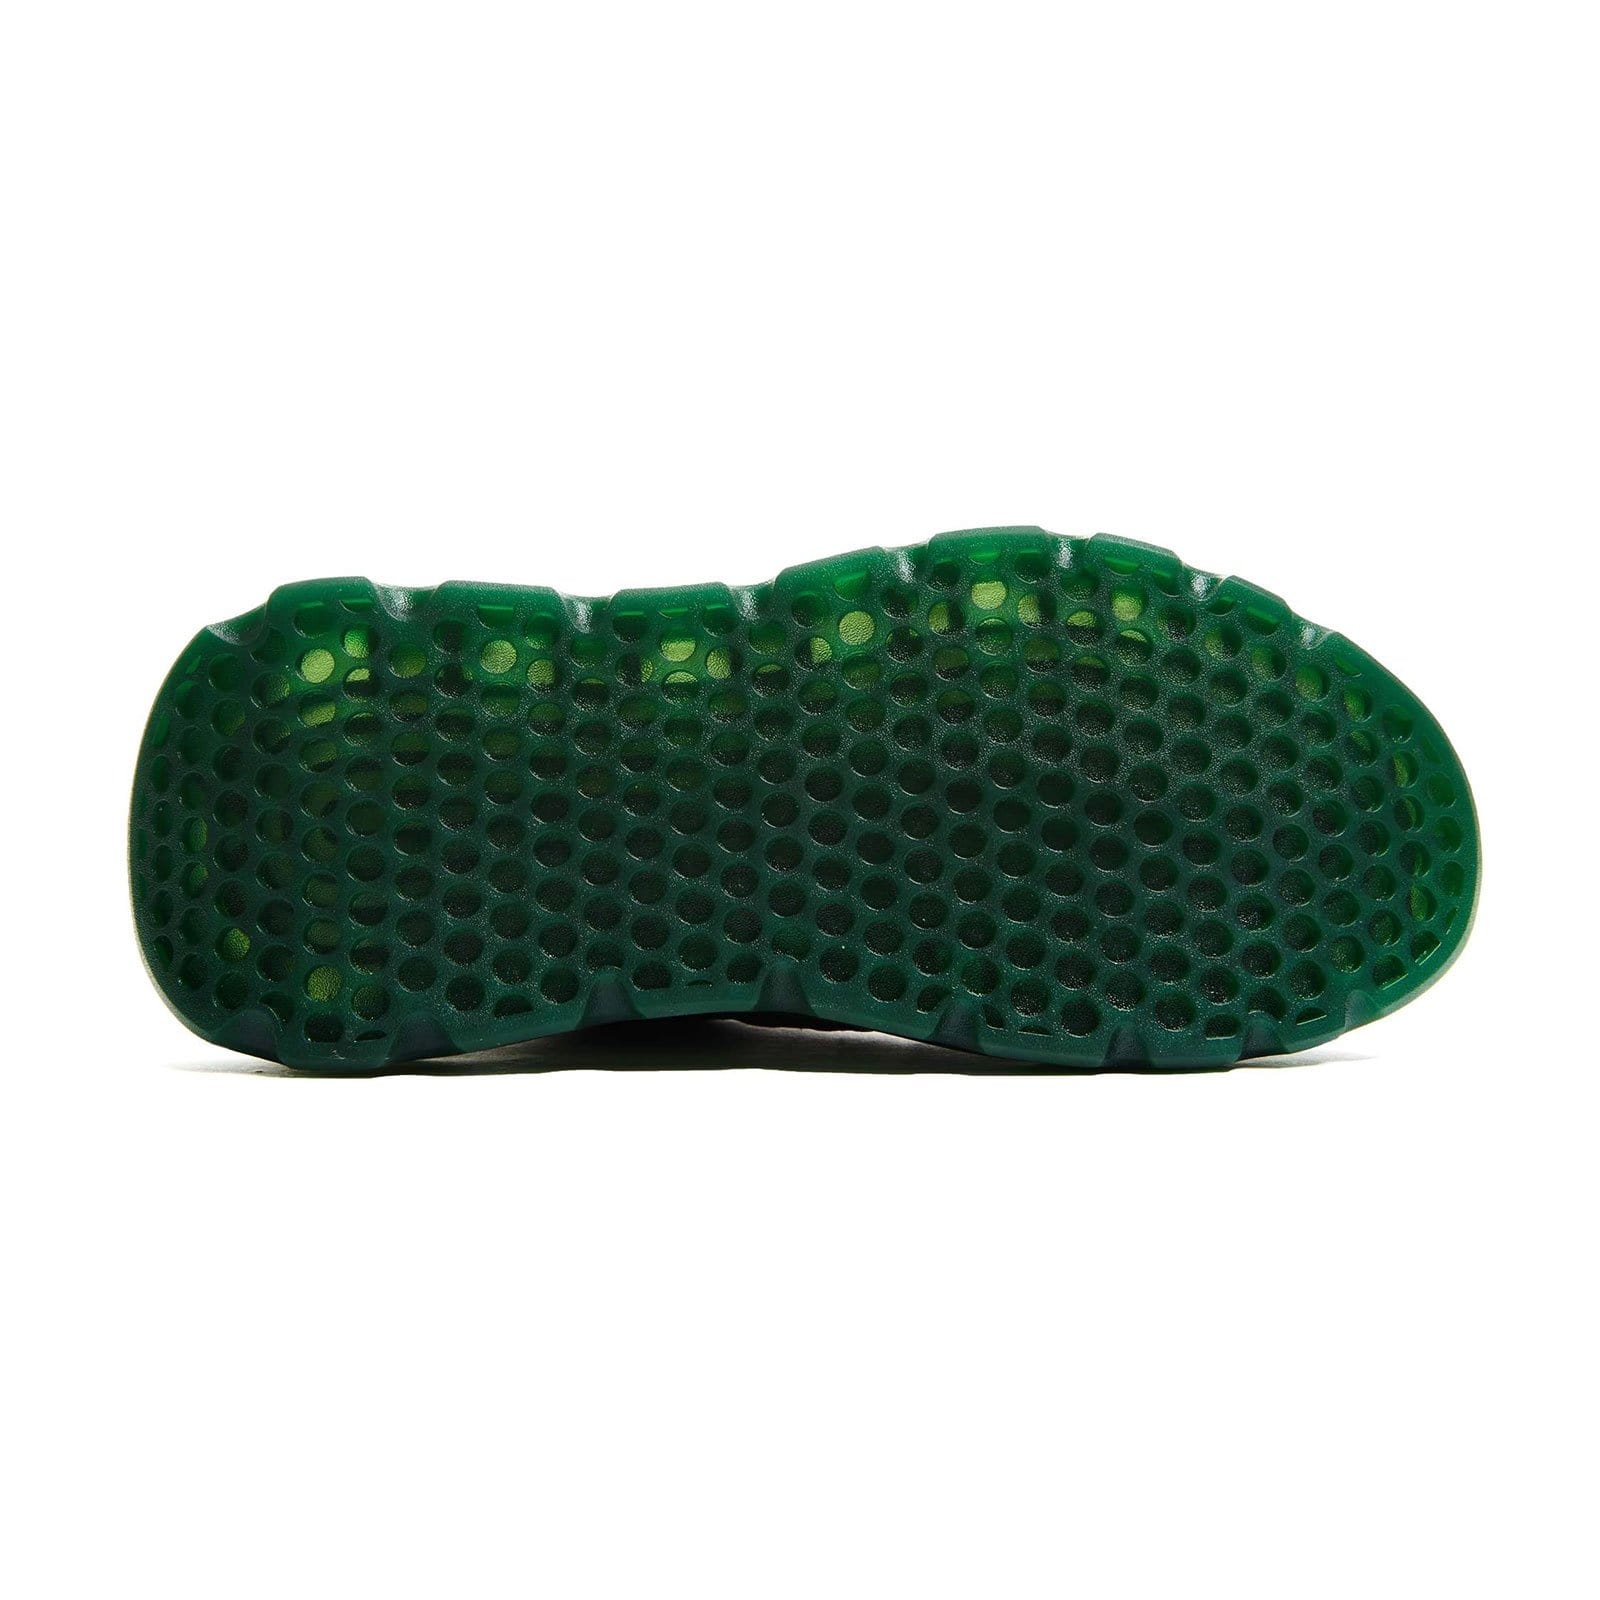 Seeinglooking: Green Giant Shoes